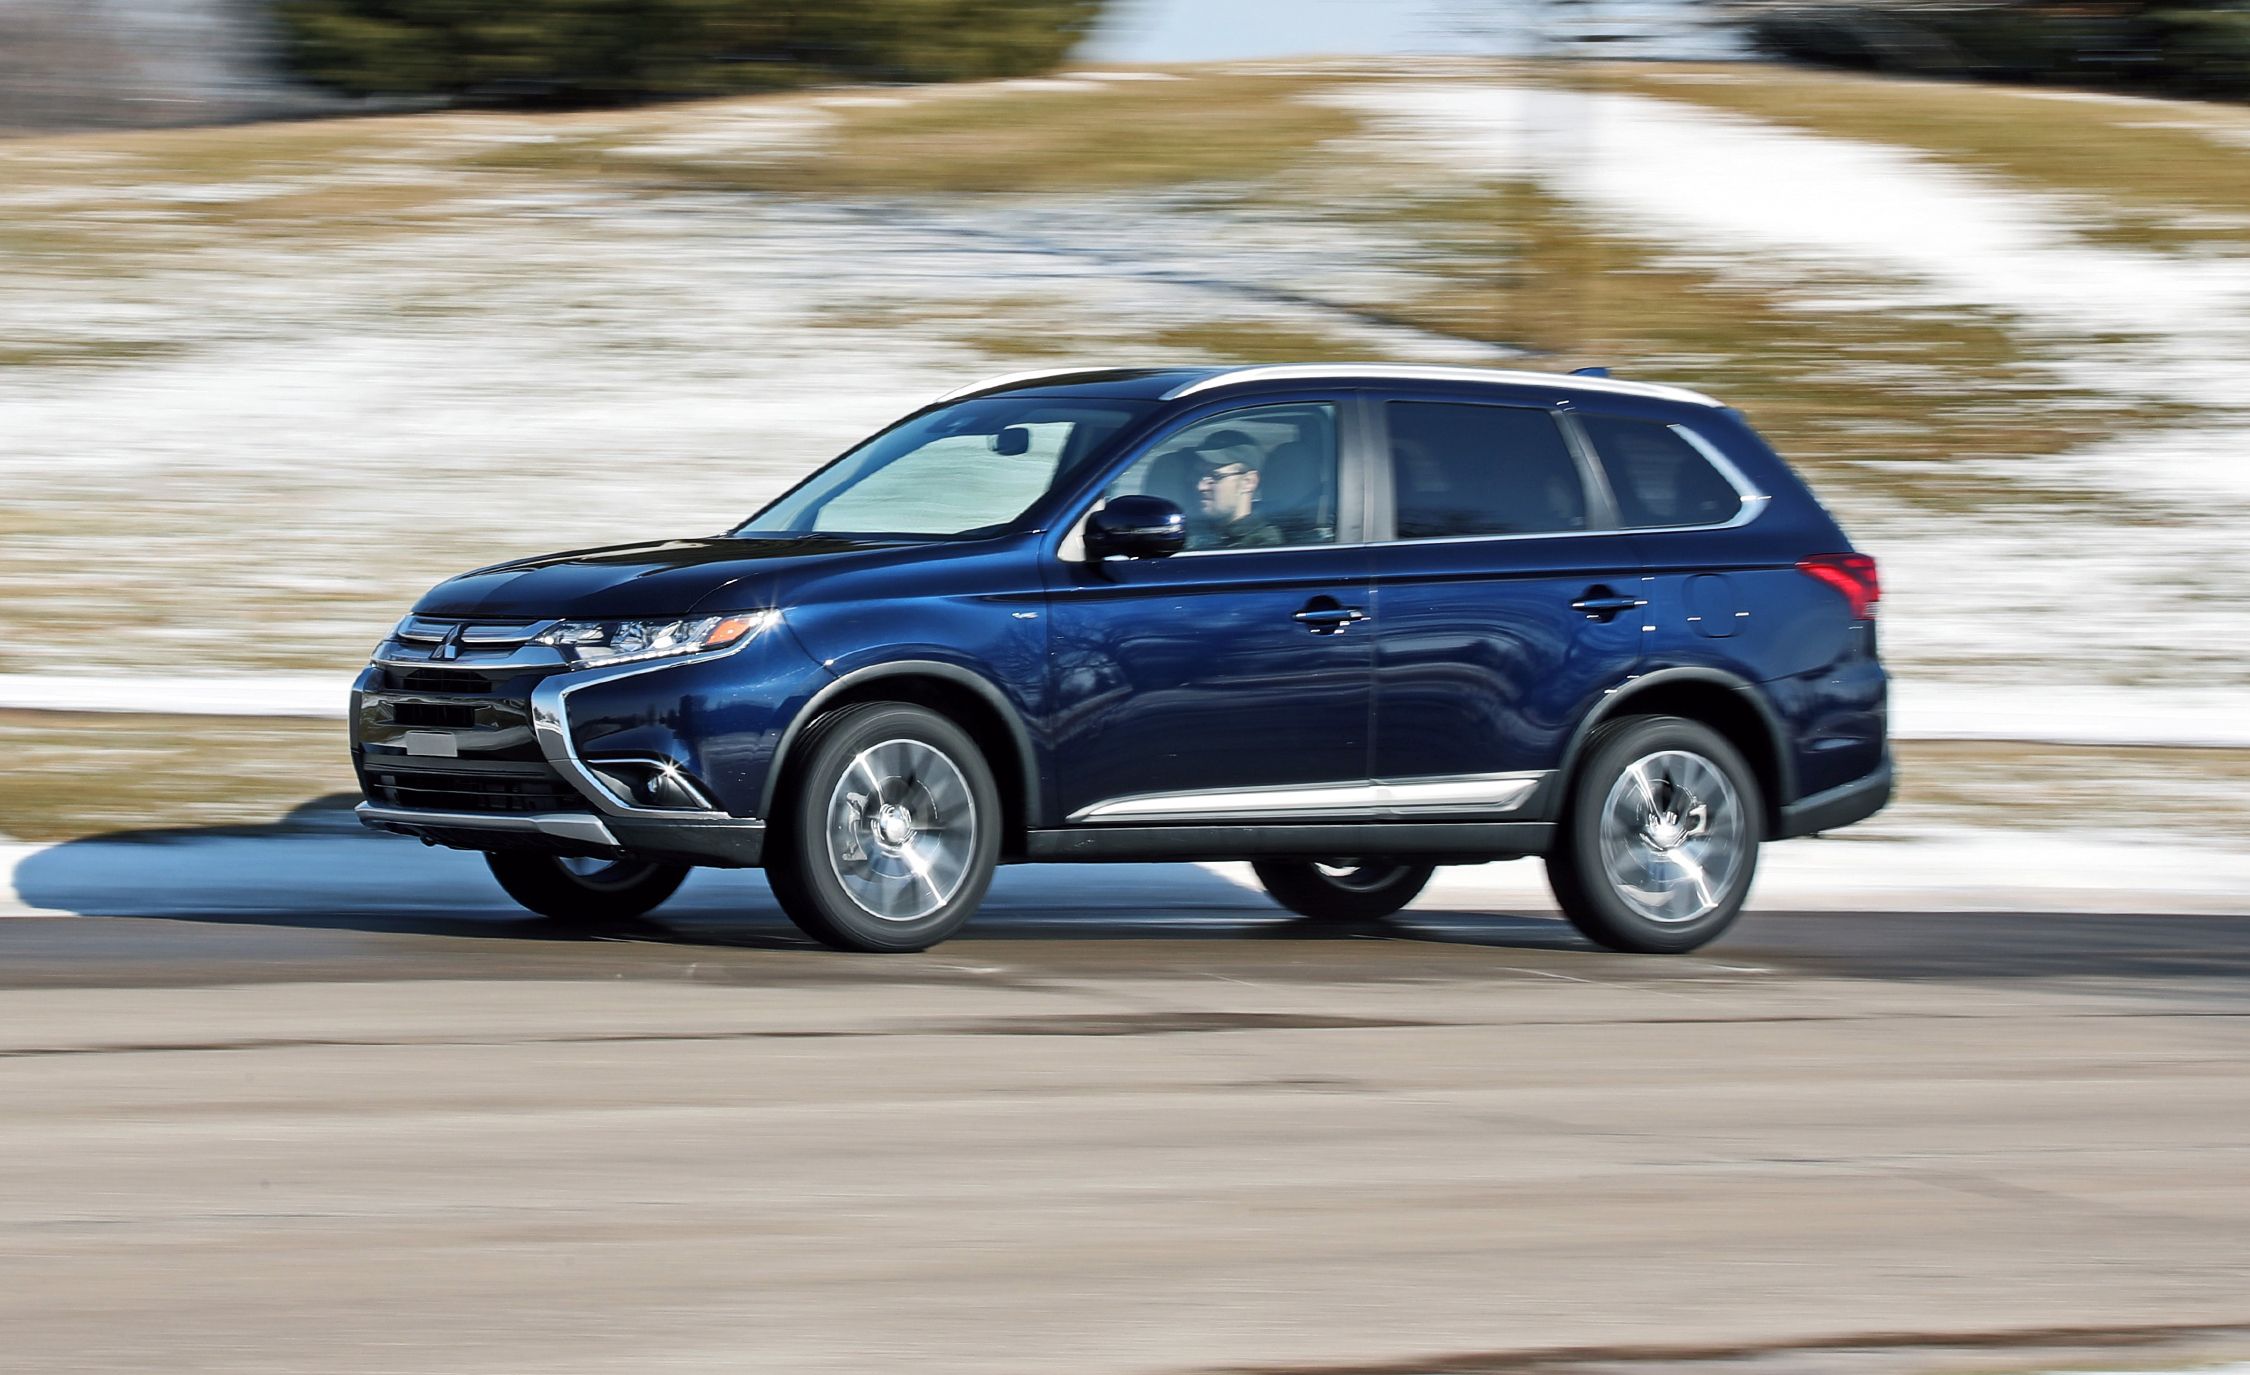 2018 Mitsubishi Outlander Review, Pricing, and Specs